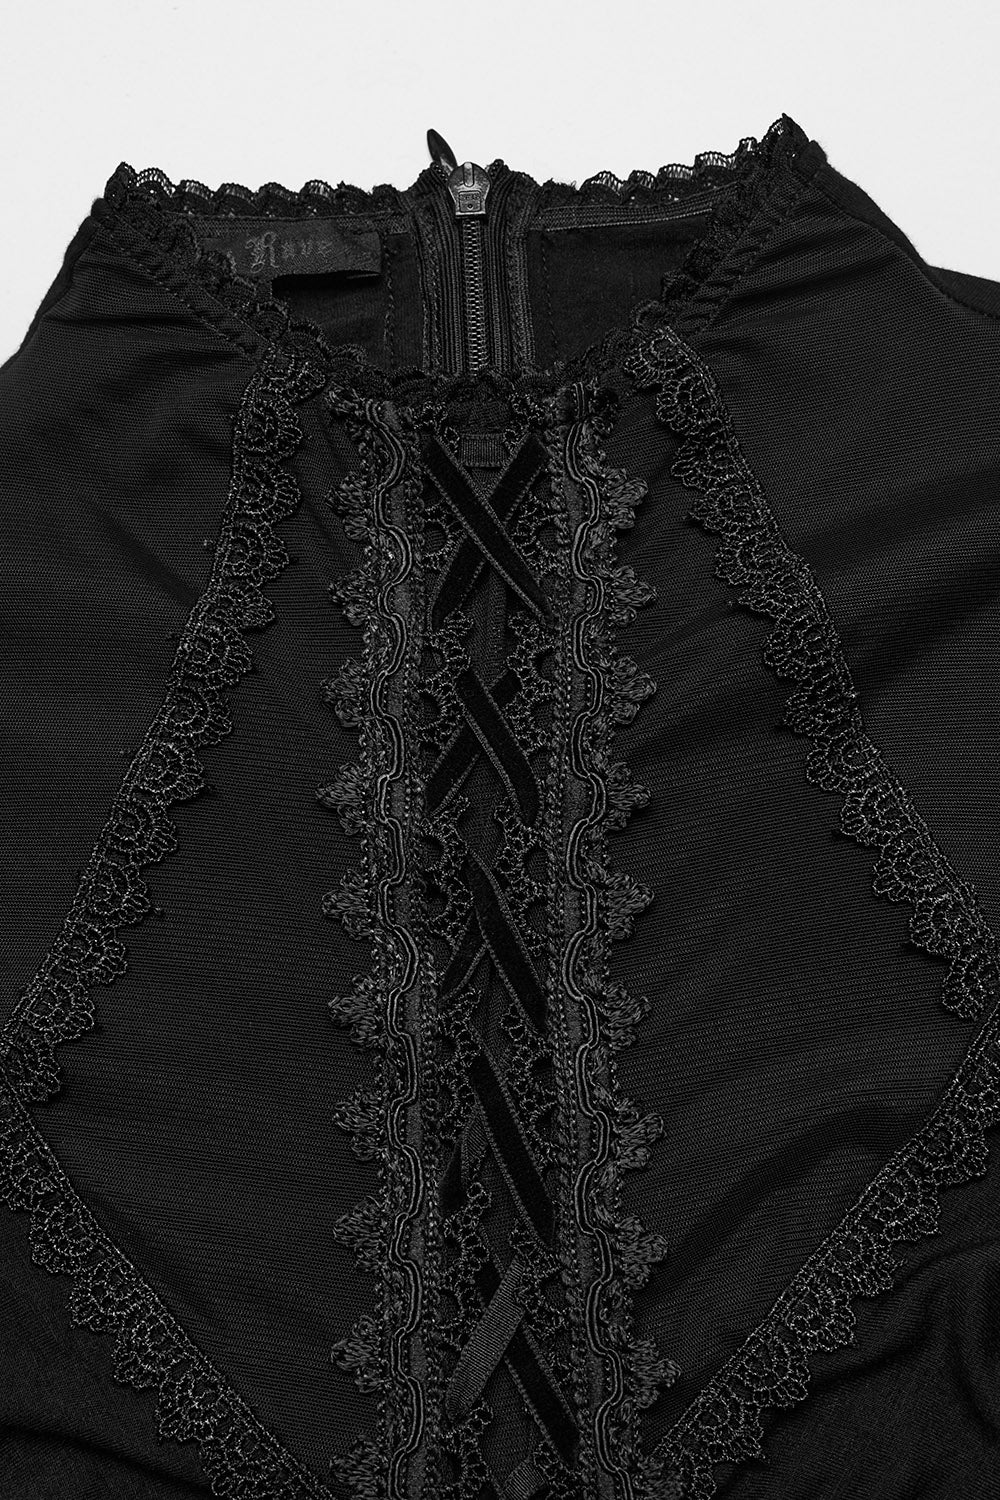 victorian goth embroidered dress